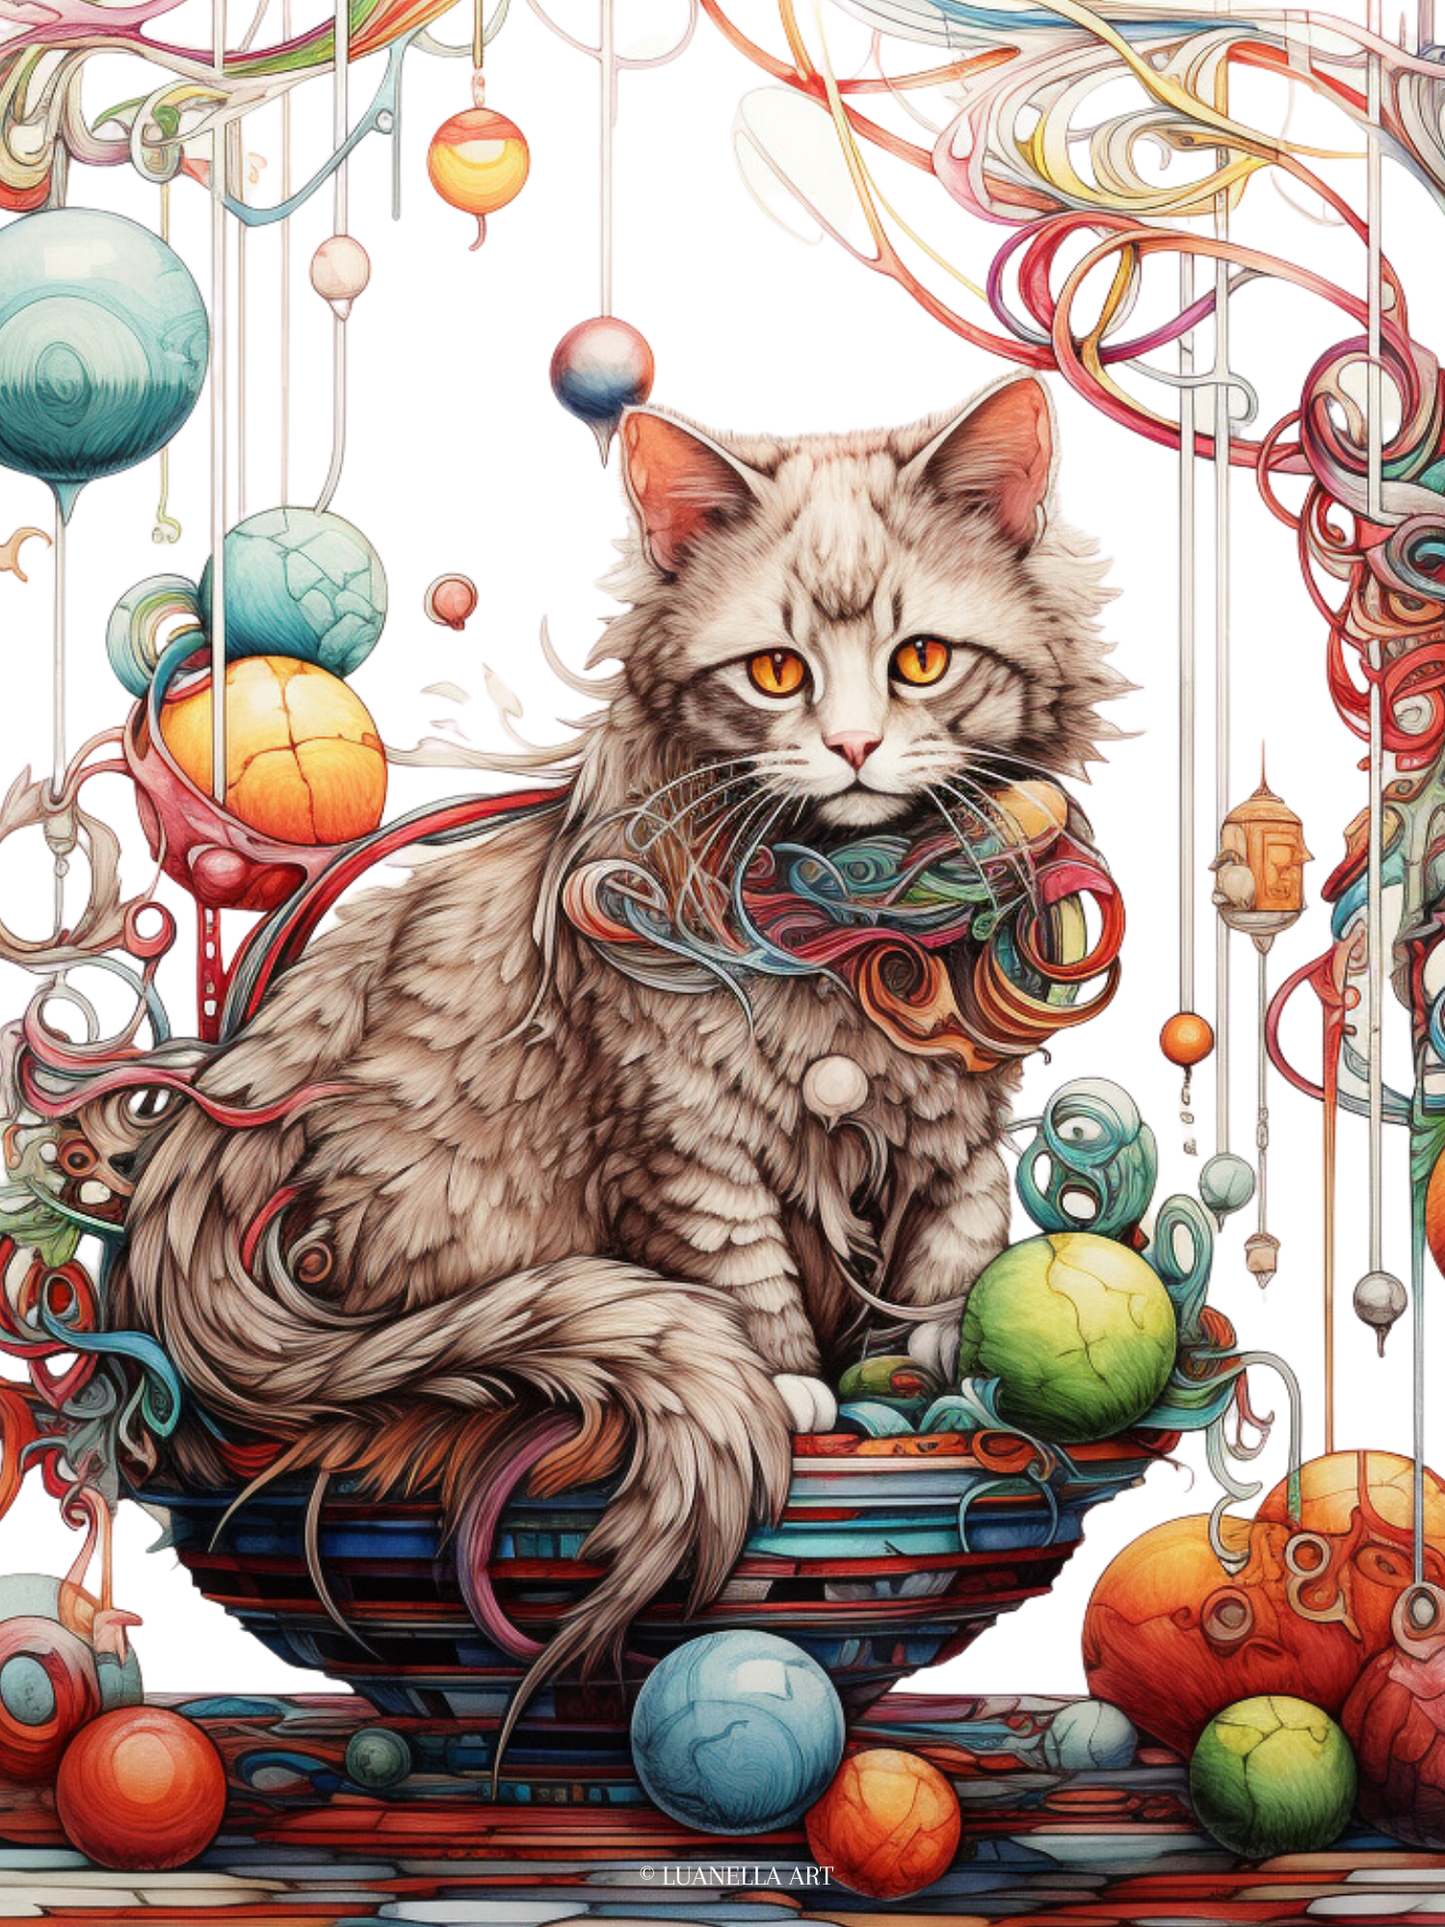 Cute Cat sitting in basket, surrounded by crystal yarn balls | Art Print | Digital Download